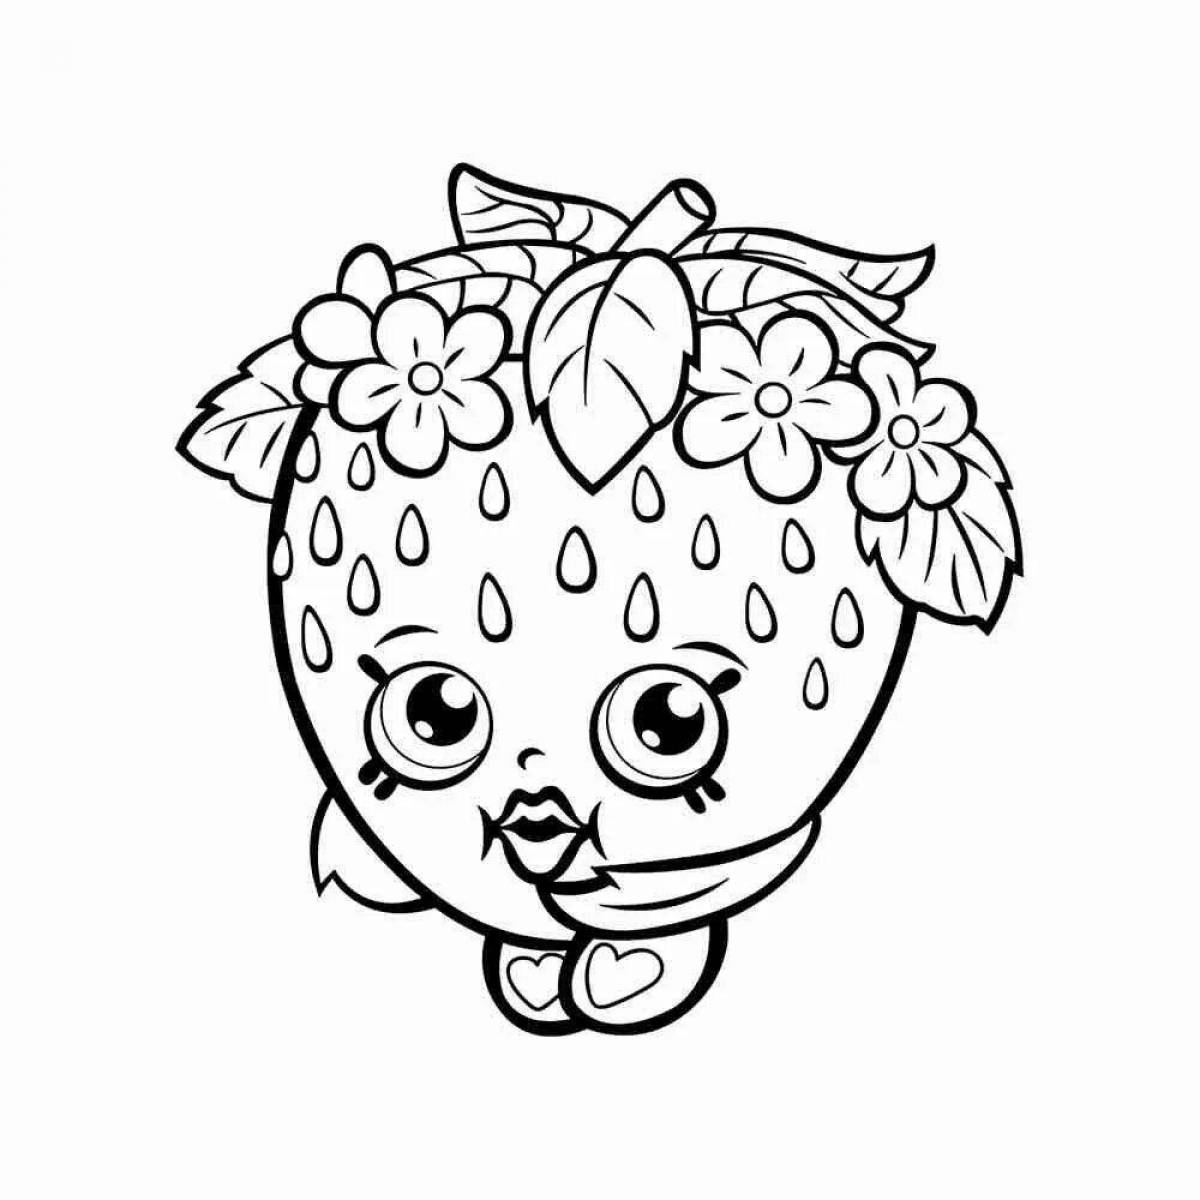 Delightful strawberry coloring book for kids